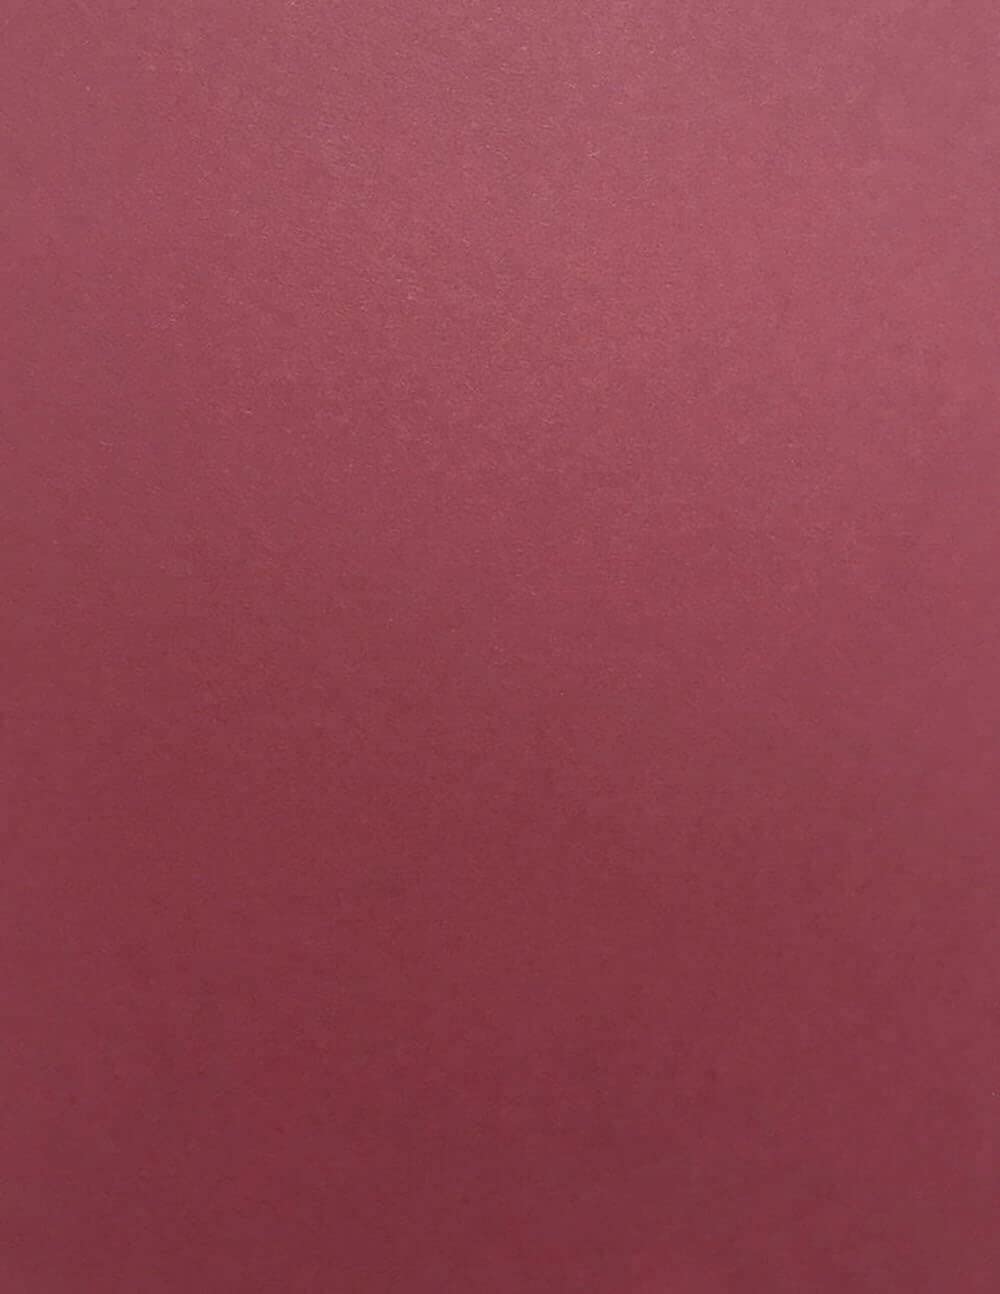 Paver RED/Wine/Burgundy Cardstock Paper - 8.5 x 11 inch Premium 80 lb.  Cover - 25 Sheets